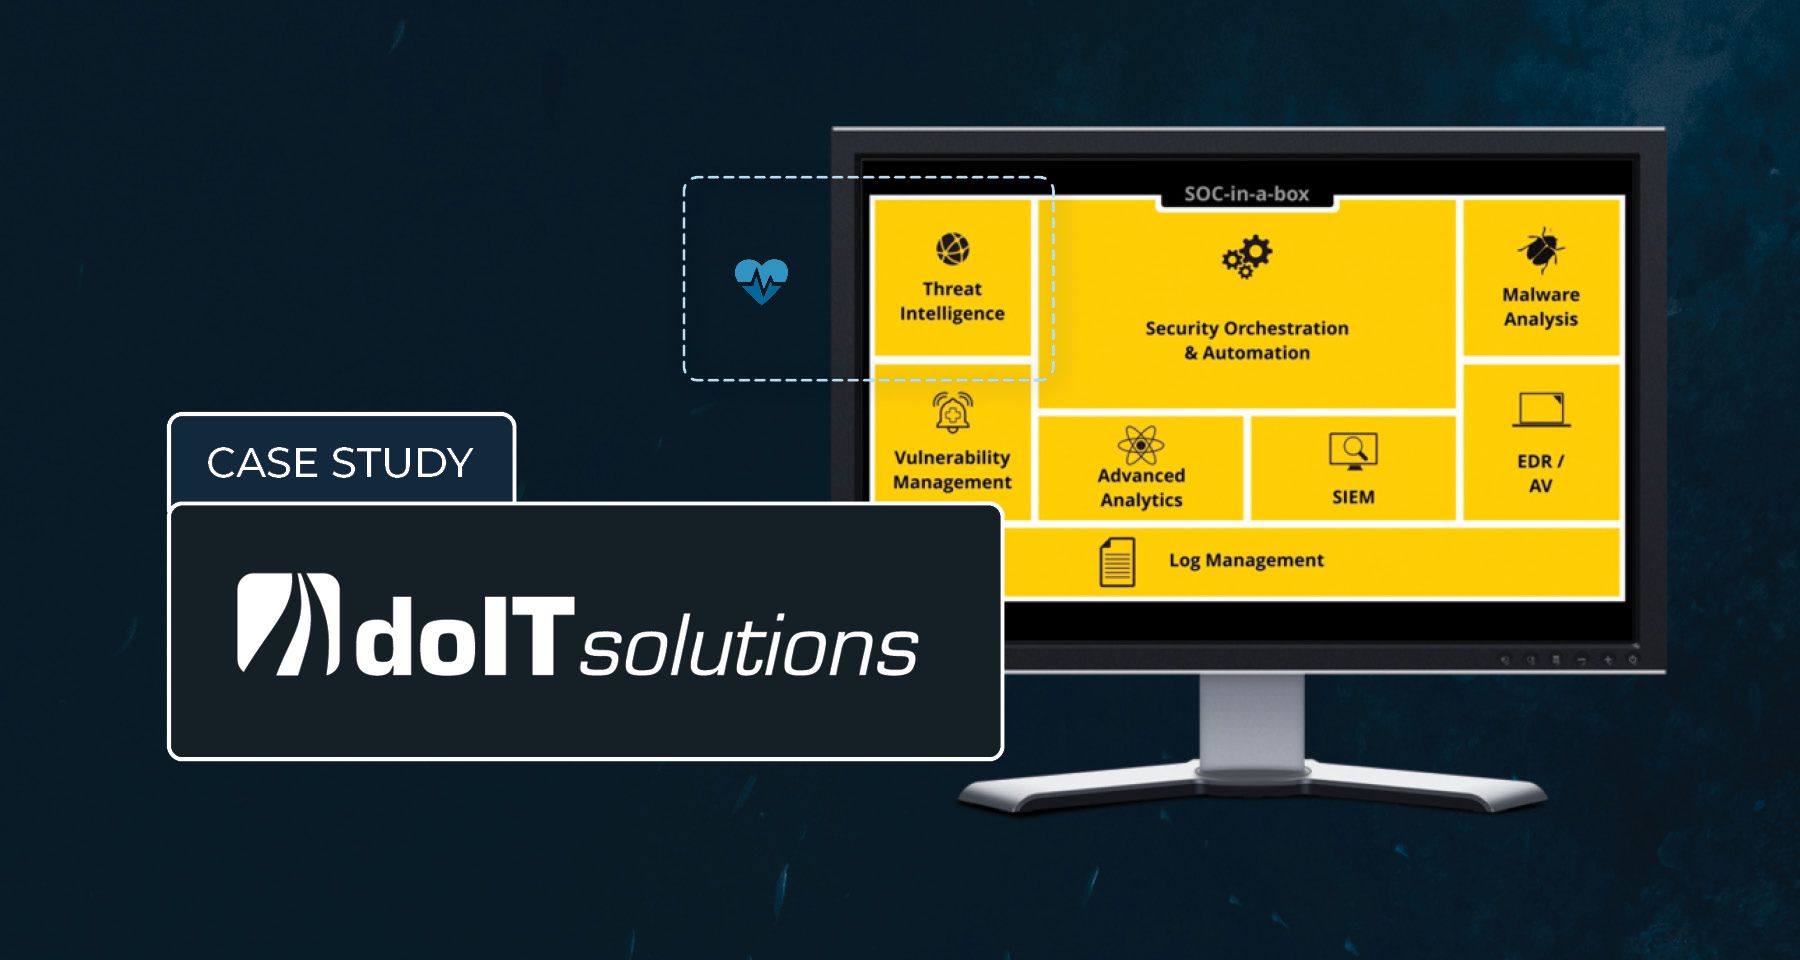 Delivering an Intelligence-Driven eSOC by doIT